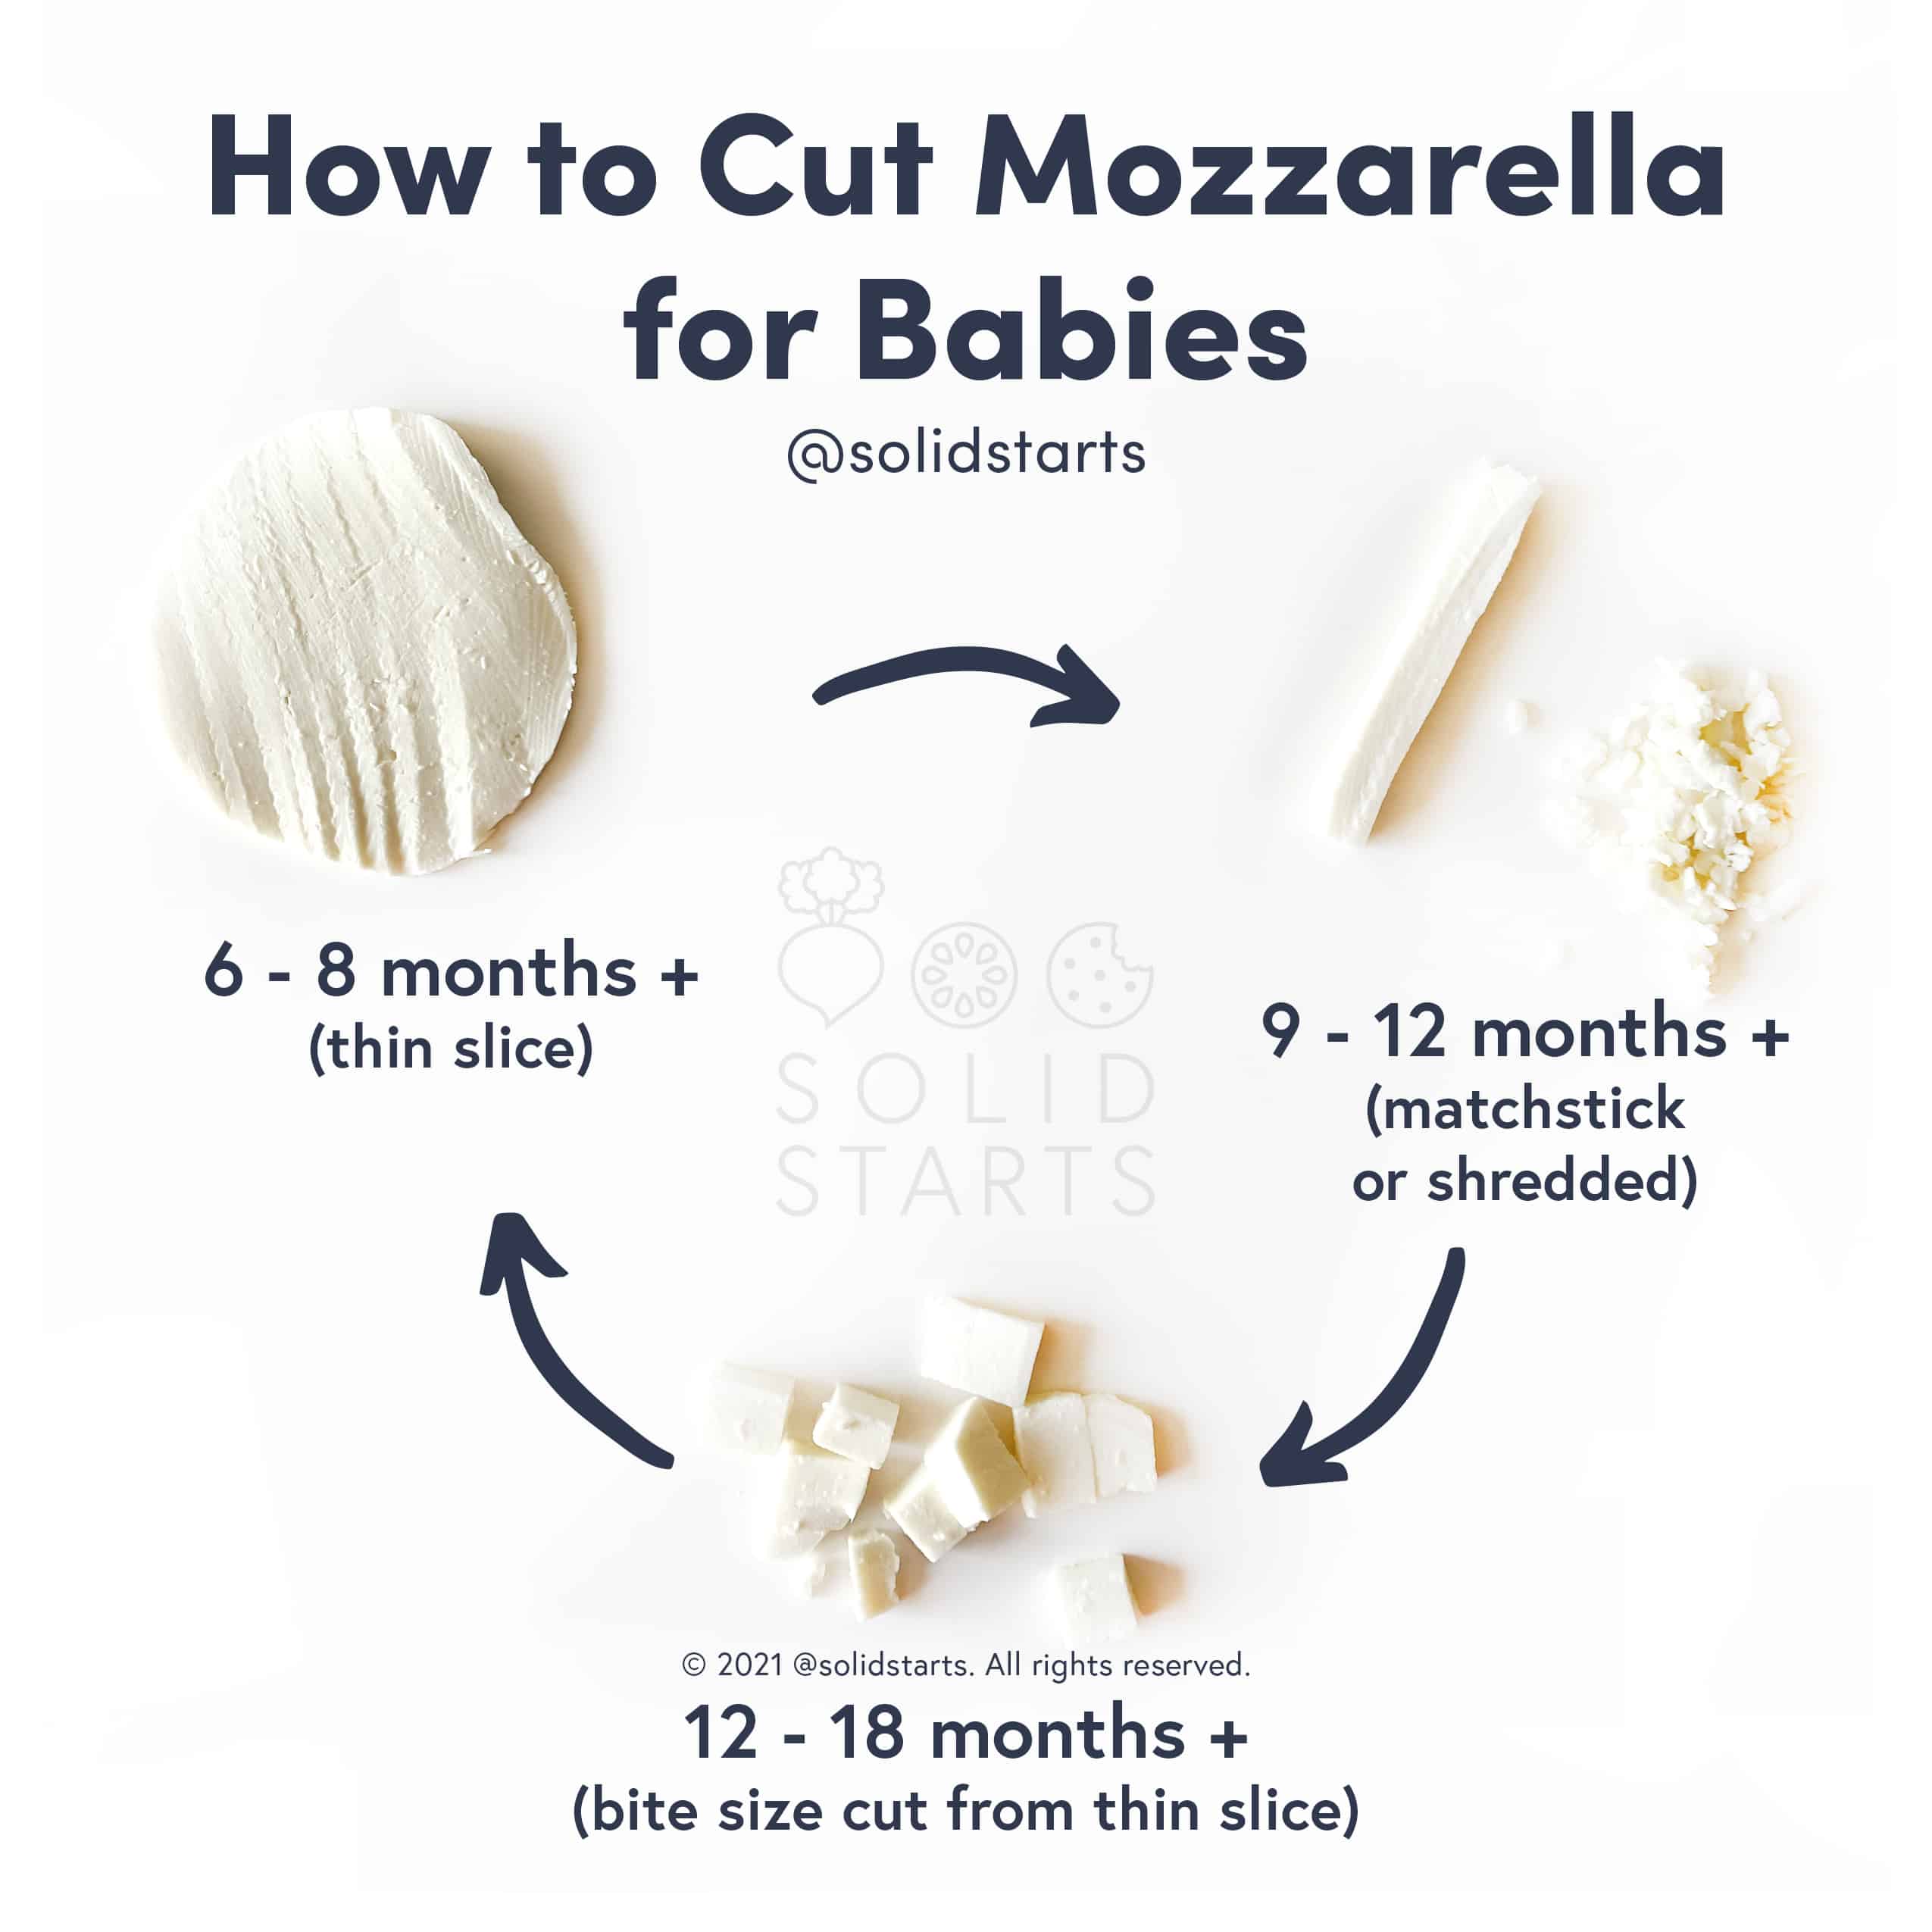 How to Cut Mozzarella for Babies